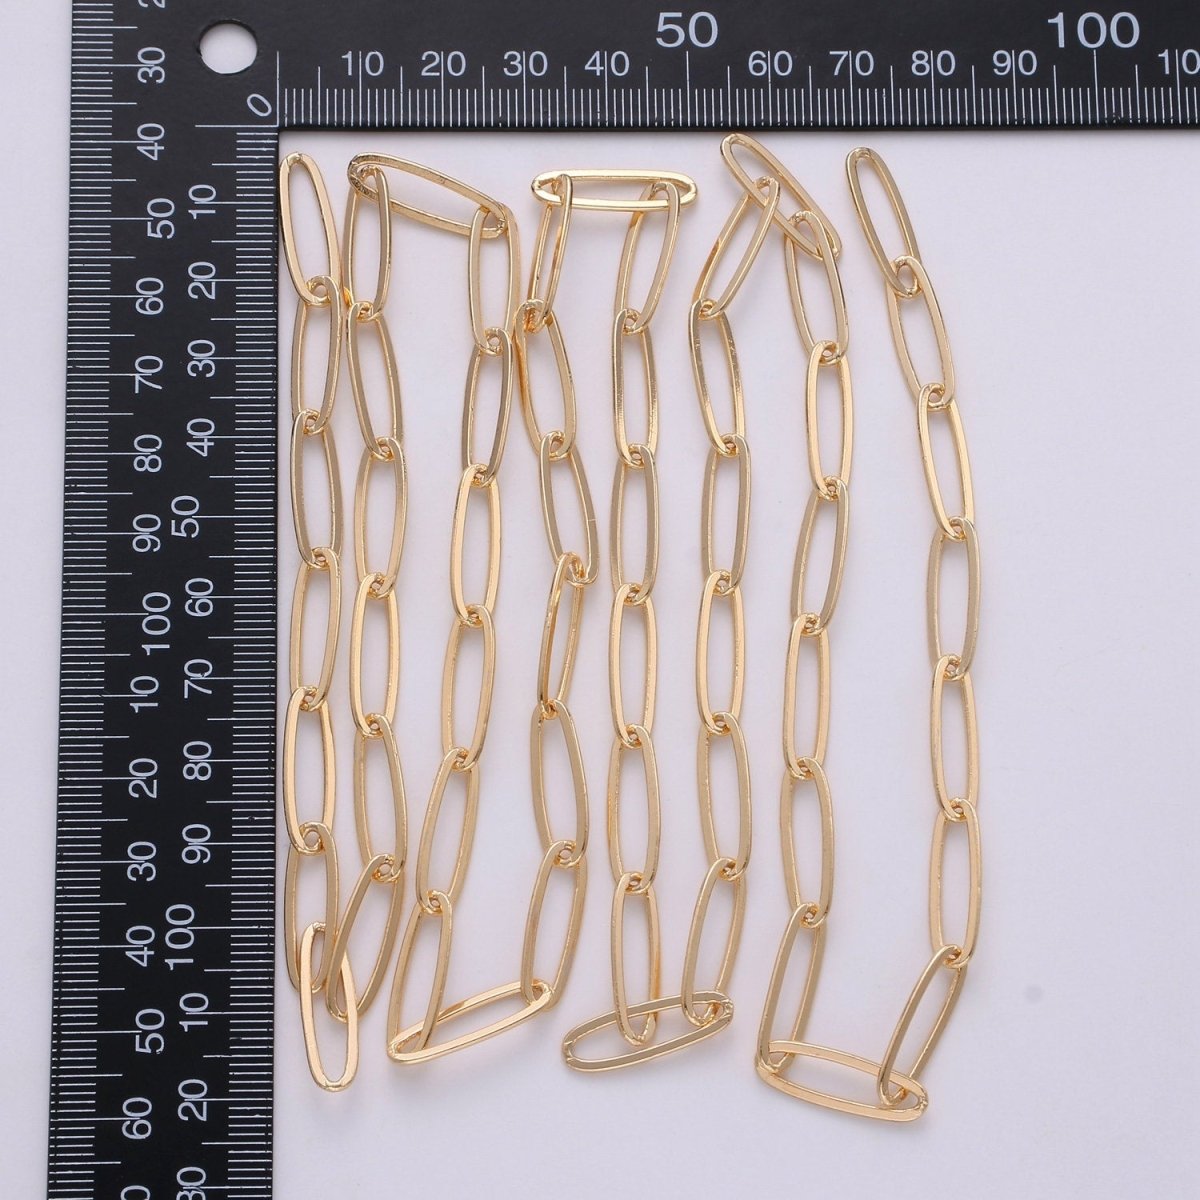 Chunky Paperclip Long Oval Chain Necklace 18x5mm 18k Gold Plated Paper Clip Chain 1 yard Lead, Nickel Free Unfinished Link Chain | ROLL-253 Clearance Pricing - DLUXCA